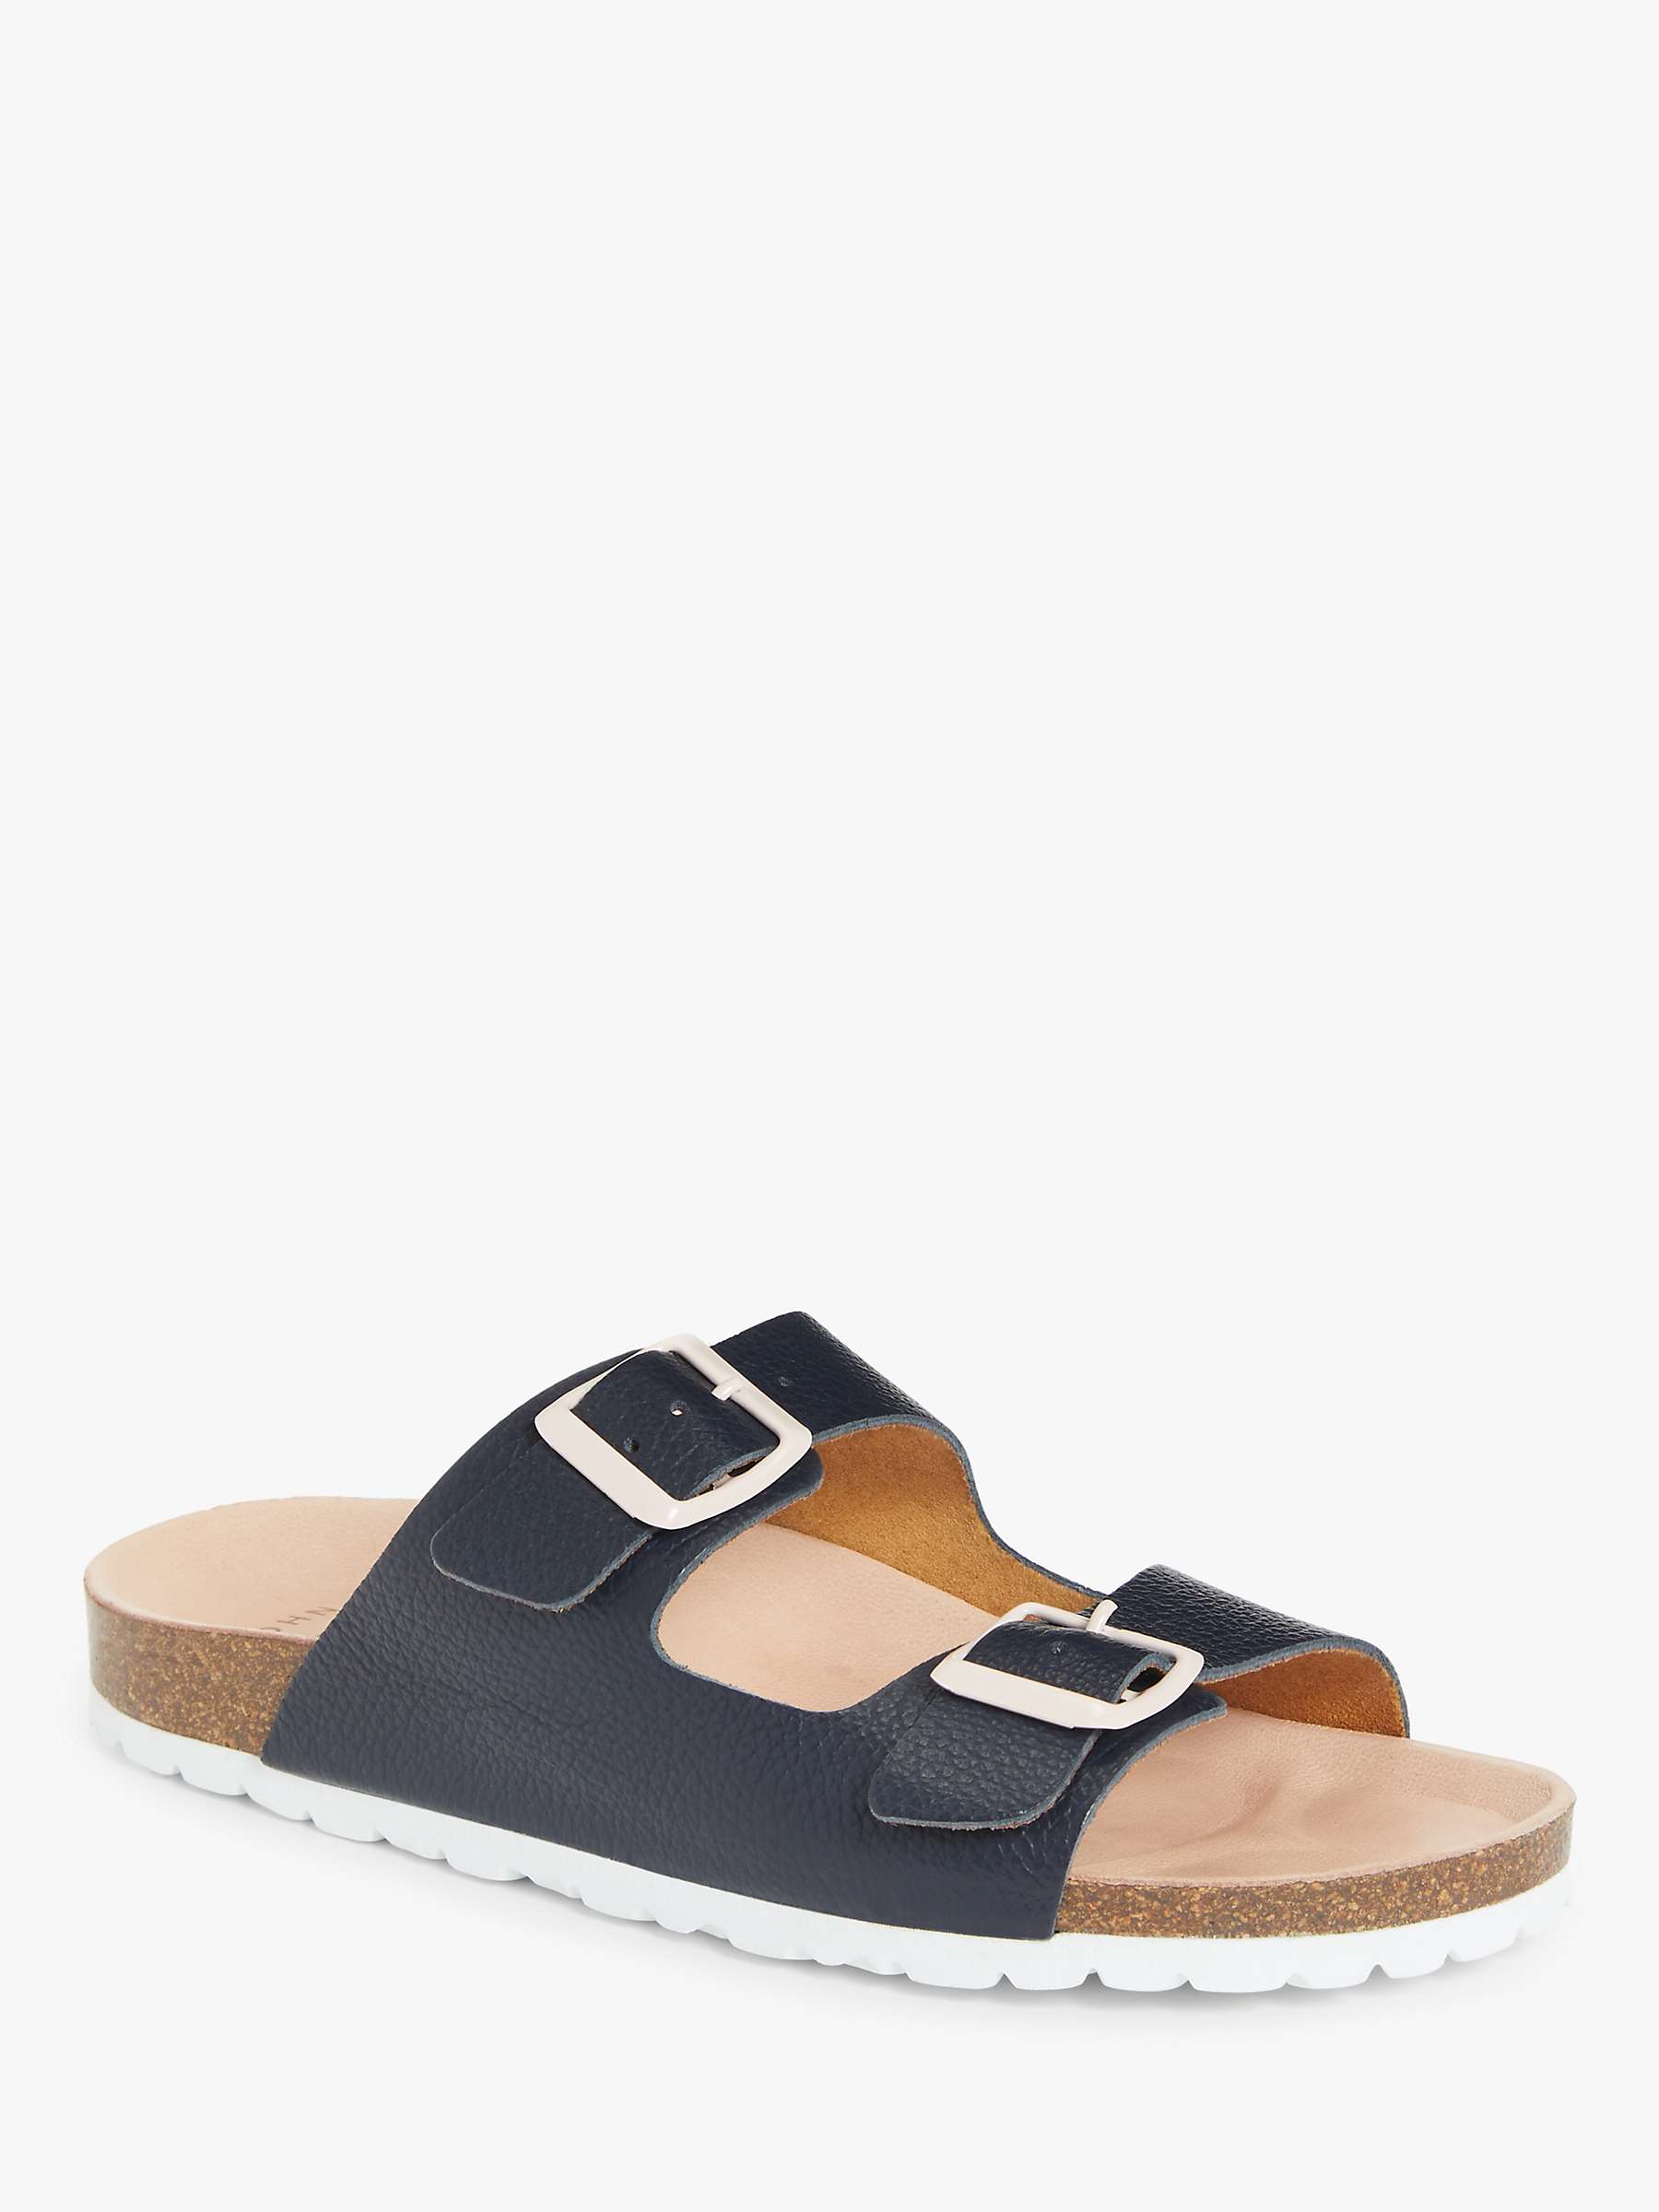 John Lewis & Partners Lexi Leather Double Strap Sandals, Navy at John ...